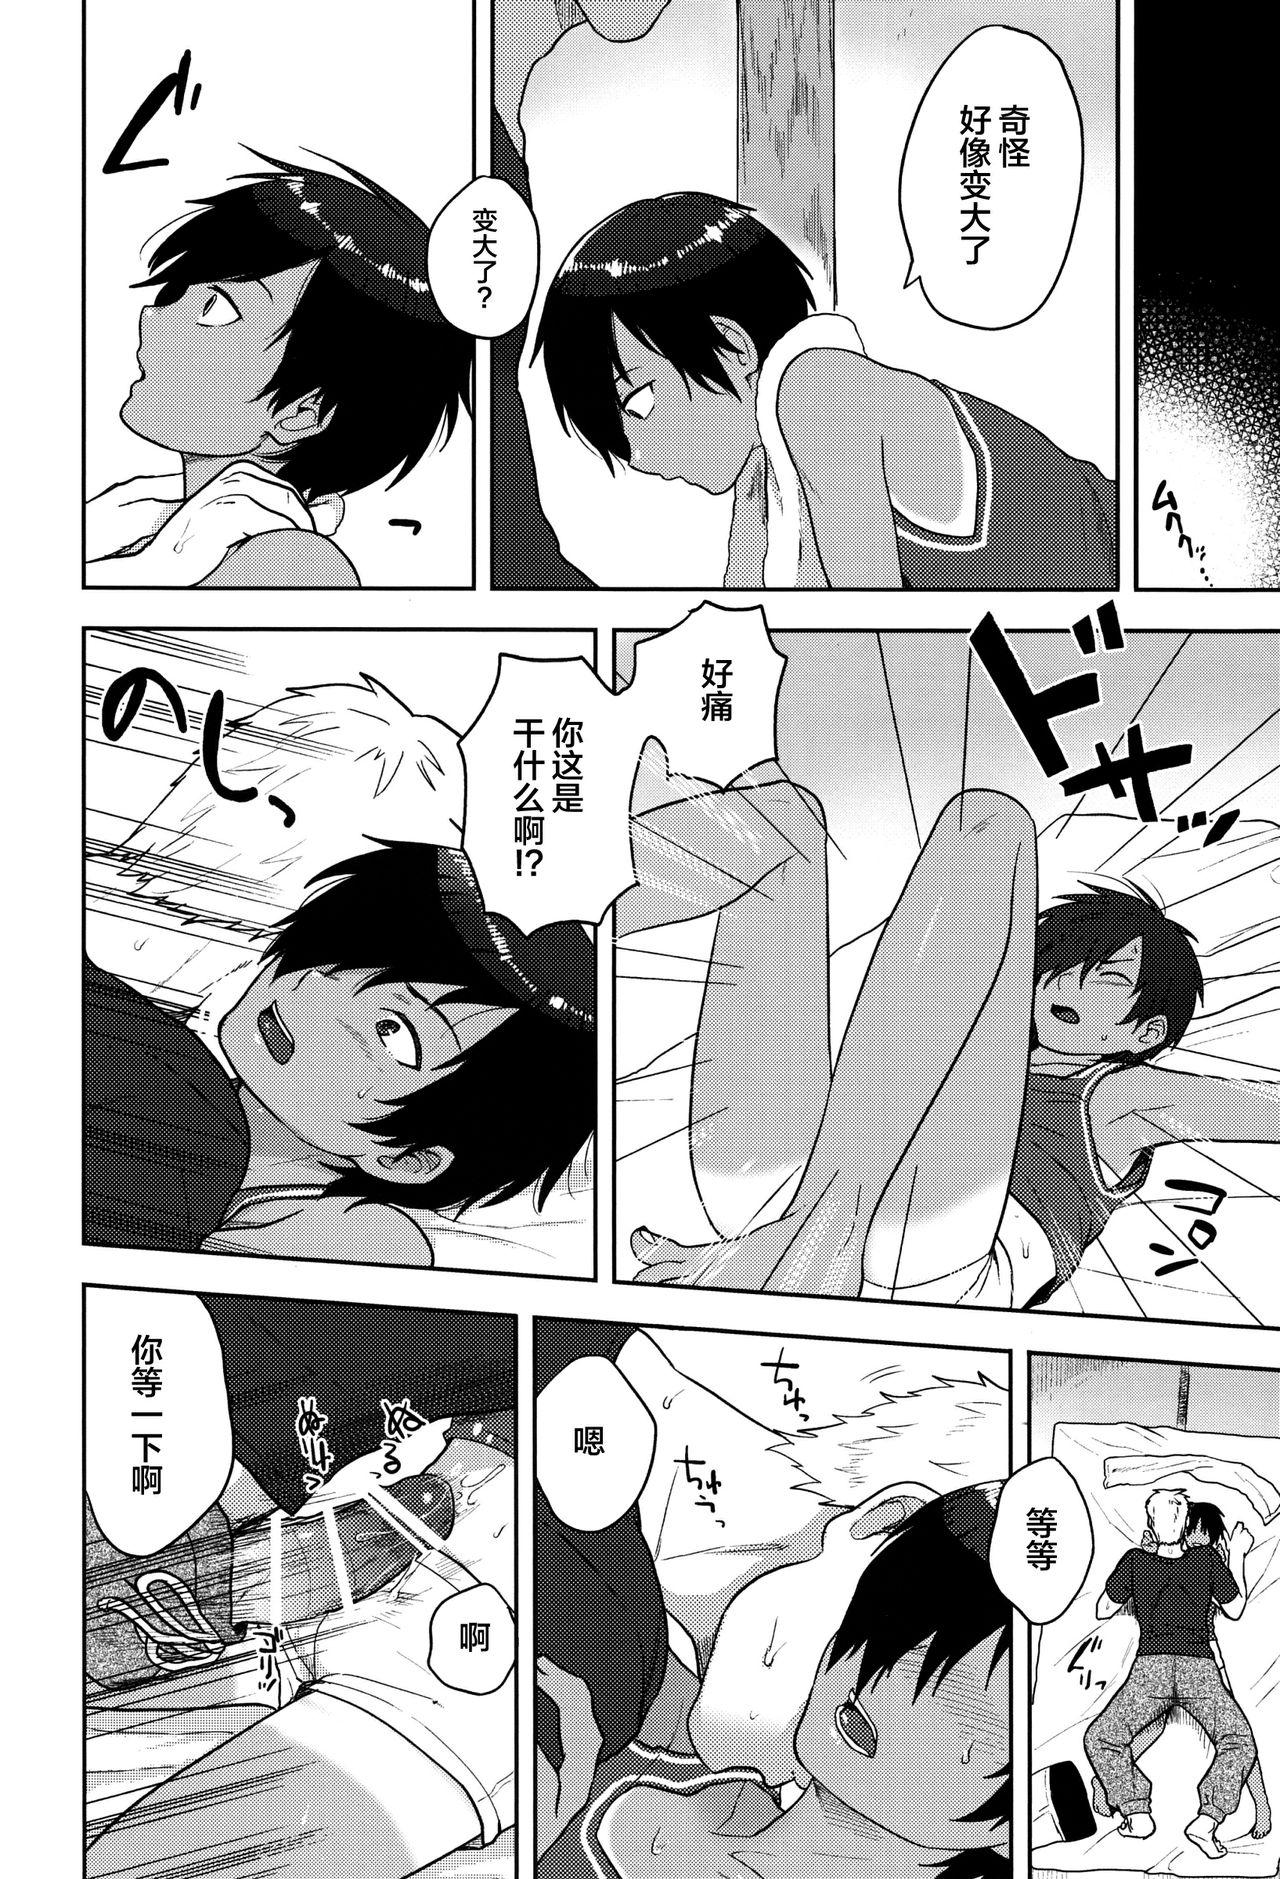 Alone DKY - Summer wars Gaping - Page 9